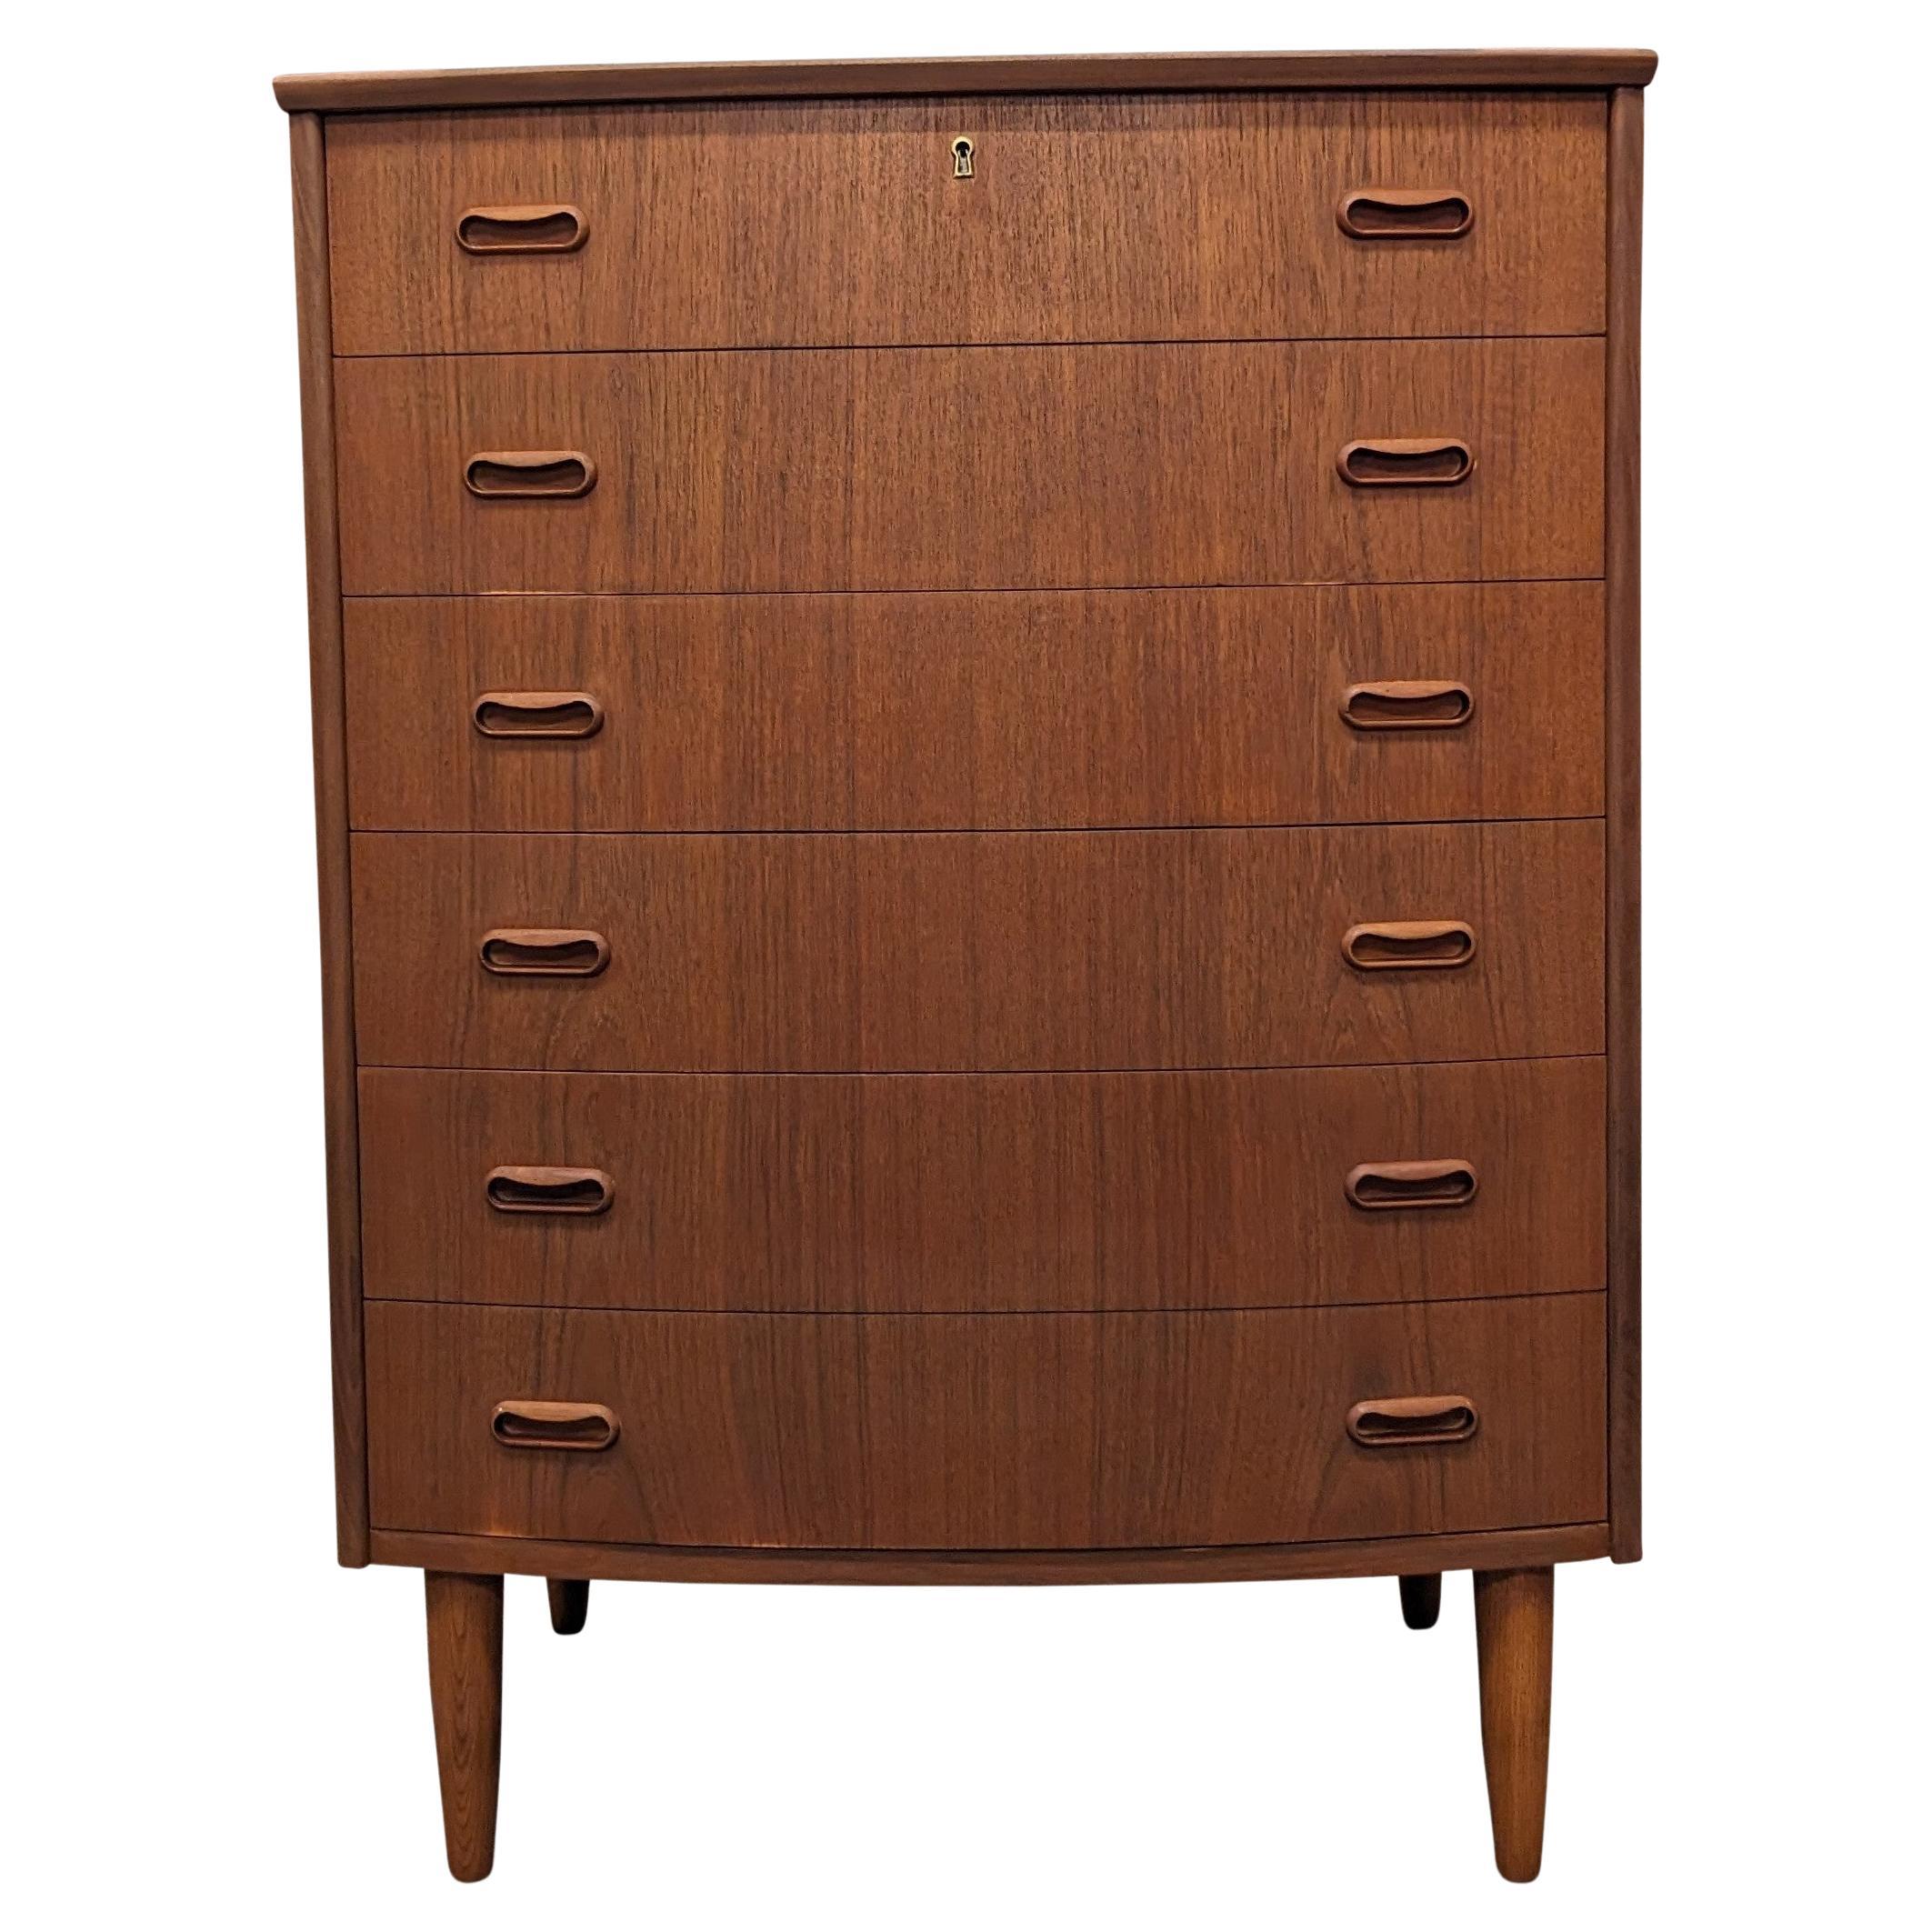 The piece is more than 65+ years old and some wear and tear can be expected, but we do everything we can to refurbish them in respect to the design. Vintage Danish mid-century modern, made in the 1950's - Recently refurbished

The piece is more than